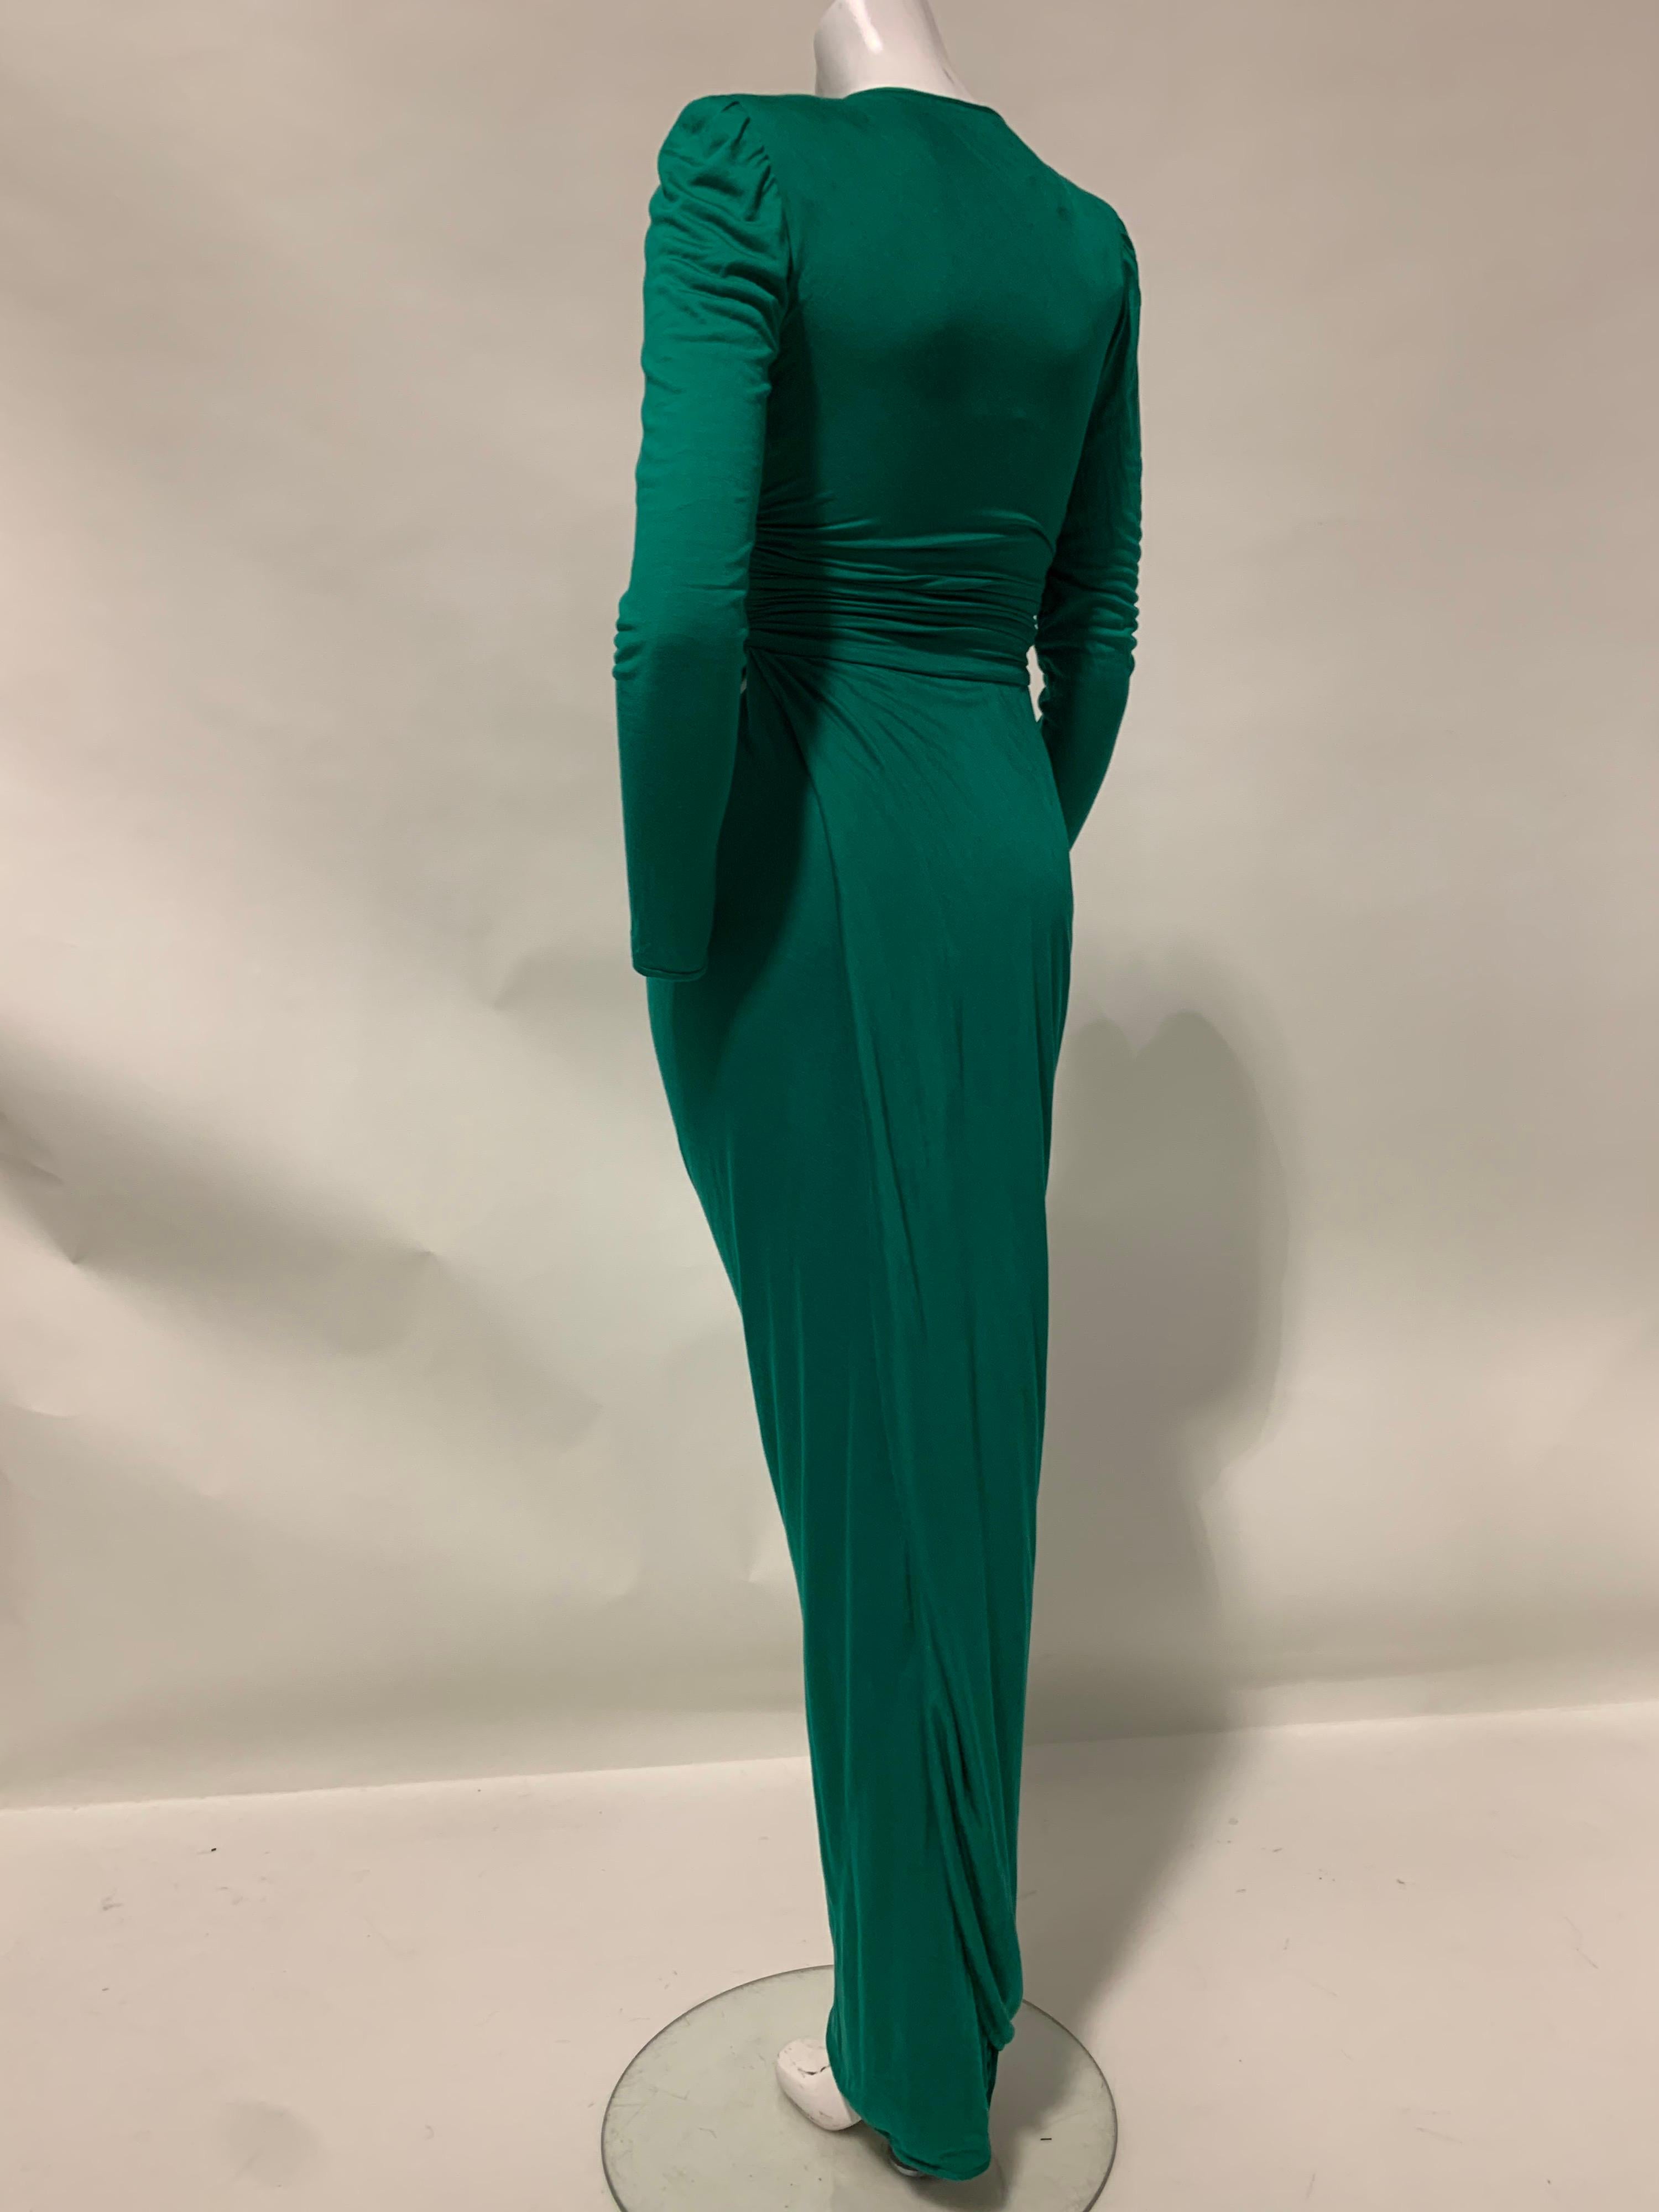 1992 Ungaro Emerald Green Draped Jersey Gown W/ Wrap Back & Bold Shoulders US 6 For Sale 4